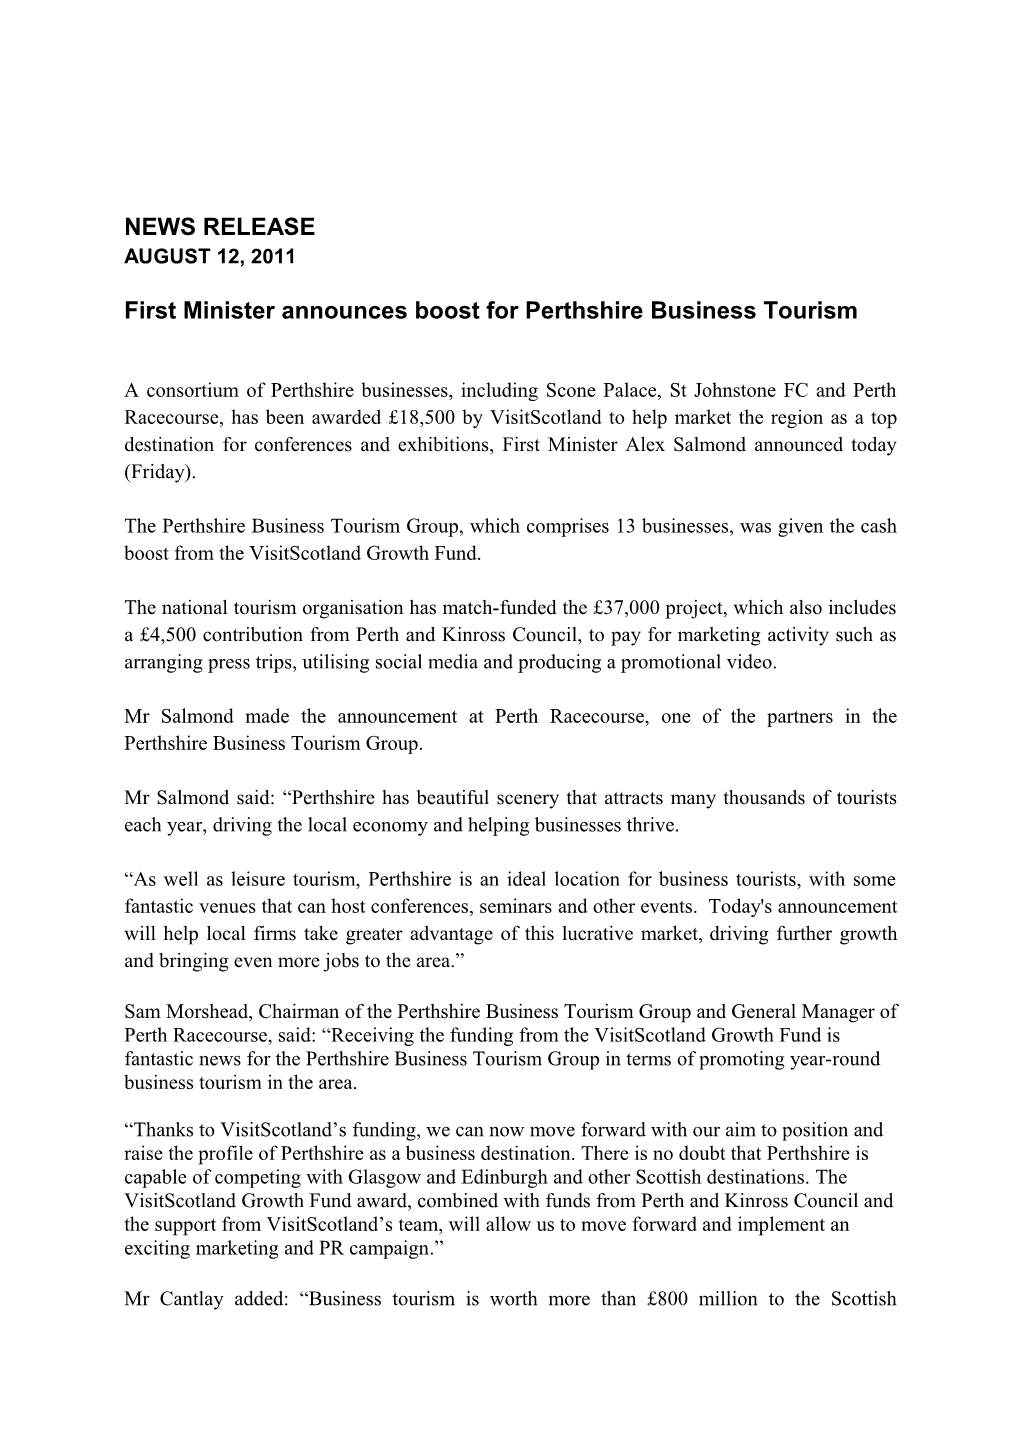 First Minister Announces Boost for Perthshire Business Tourism